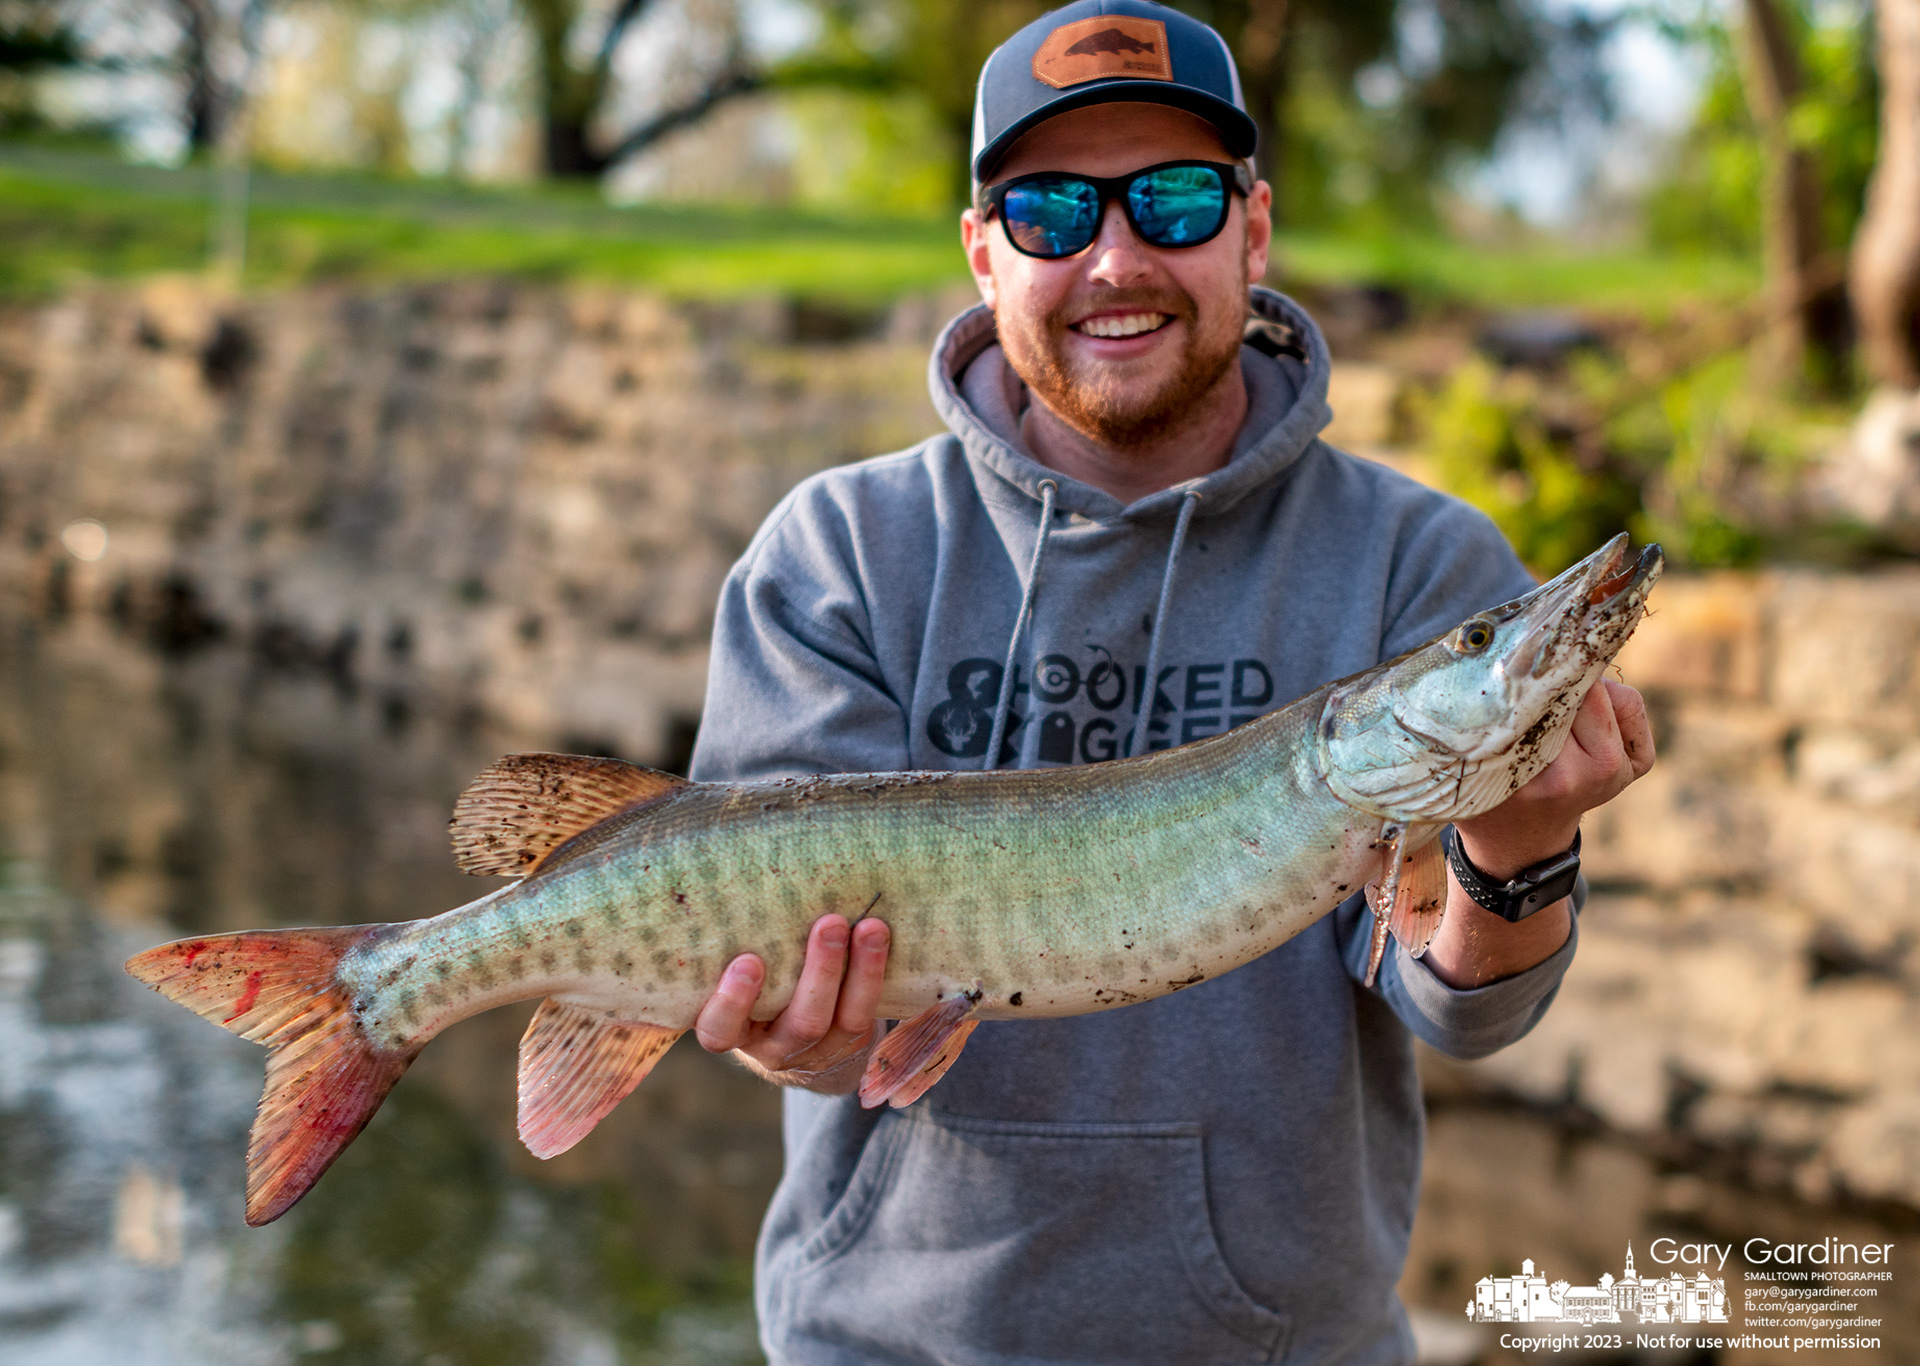 A fisherman bears a wide grin as he shows off the 30-inch muskie he pulled from the shallows beneath the Alum Creek Park North low-head dam. My Final Photo for April 26, 2023.